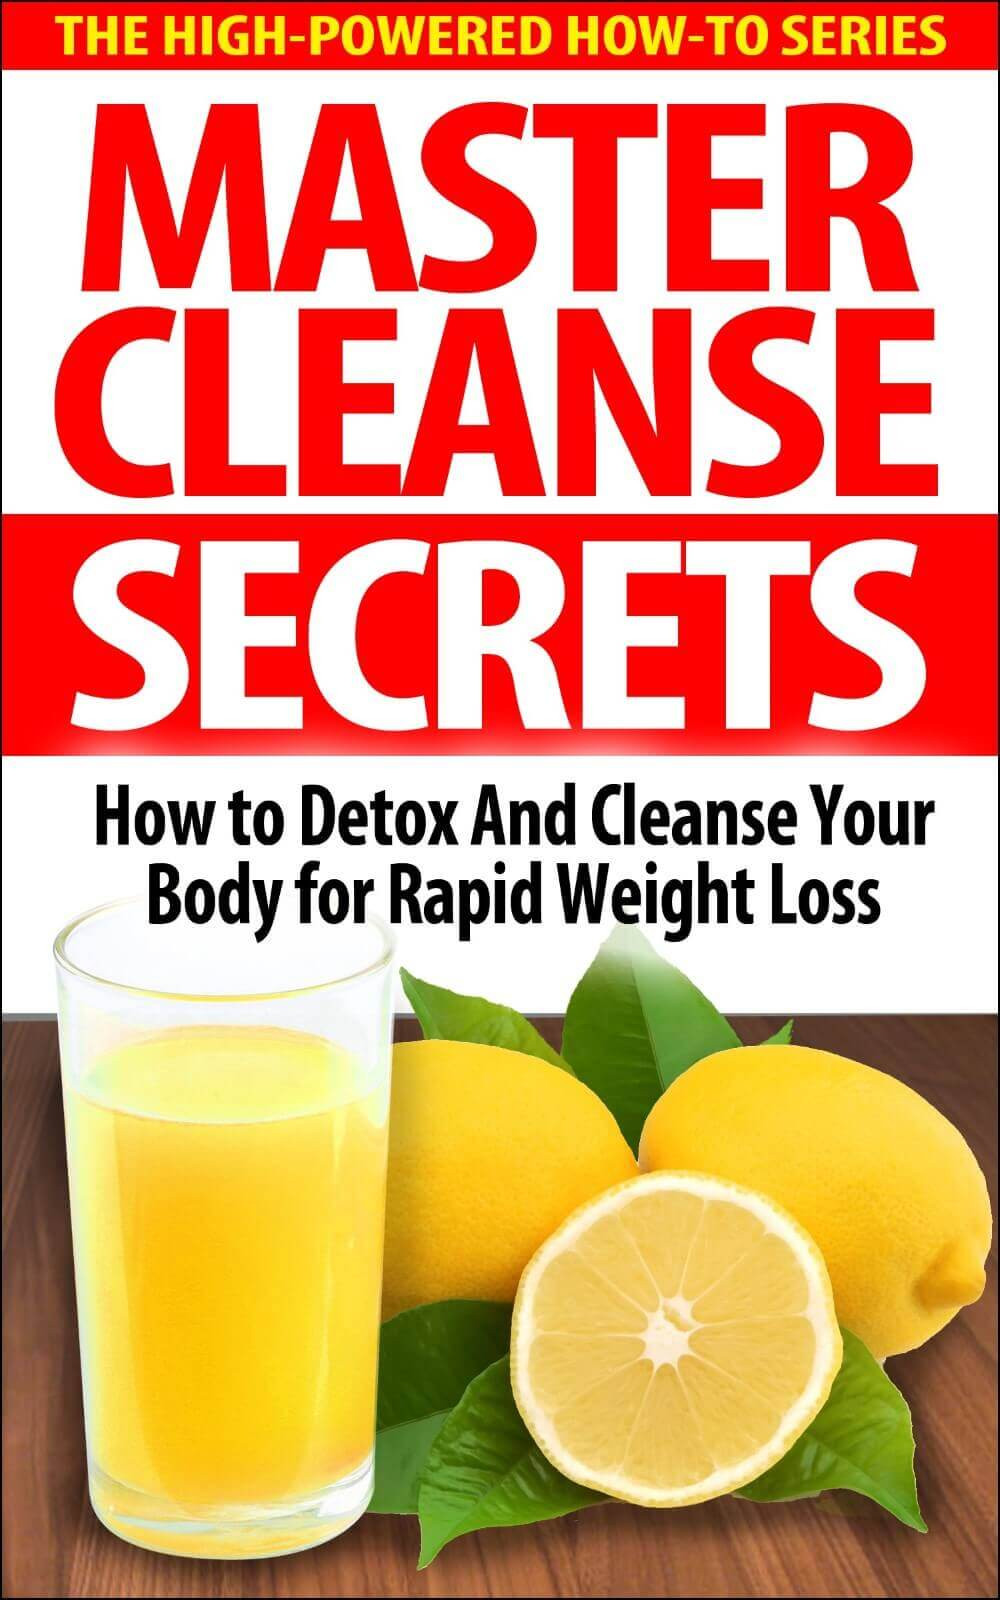 Quick Weight Loss Cleanse
 Master Cleanse Secrets Review Must Knowing Before You Buy